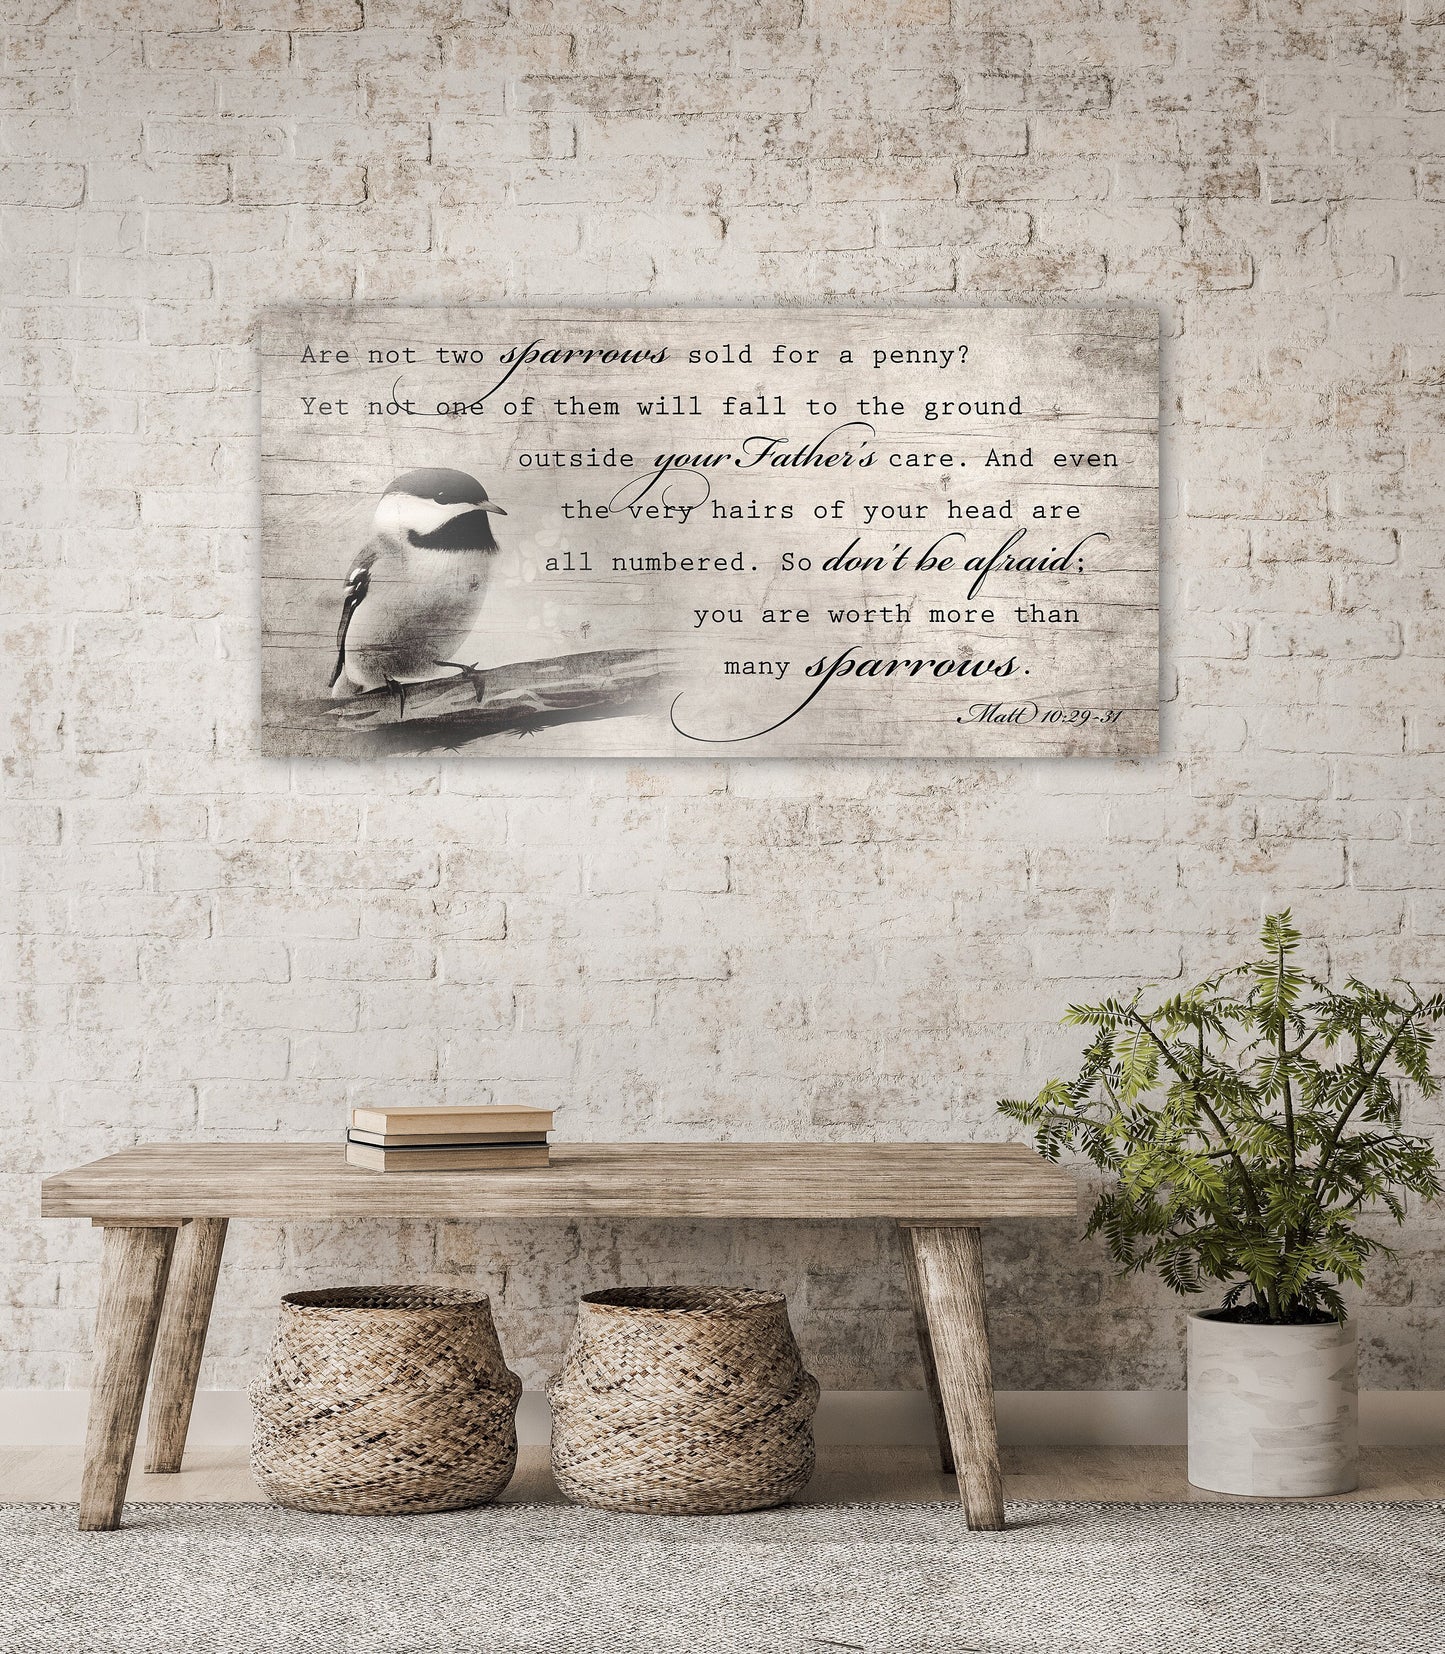 More than Many Sparrows, Matthew 10:29-31 Scripture Art, God's Protection, Christian Wall Decor, Encouragement decor, Wood sign with verse